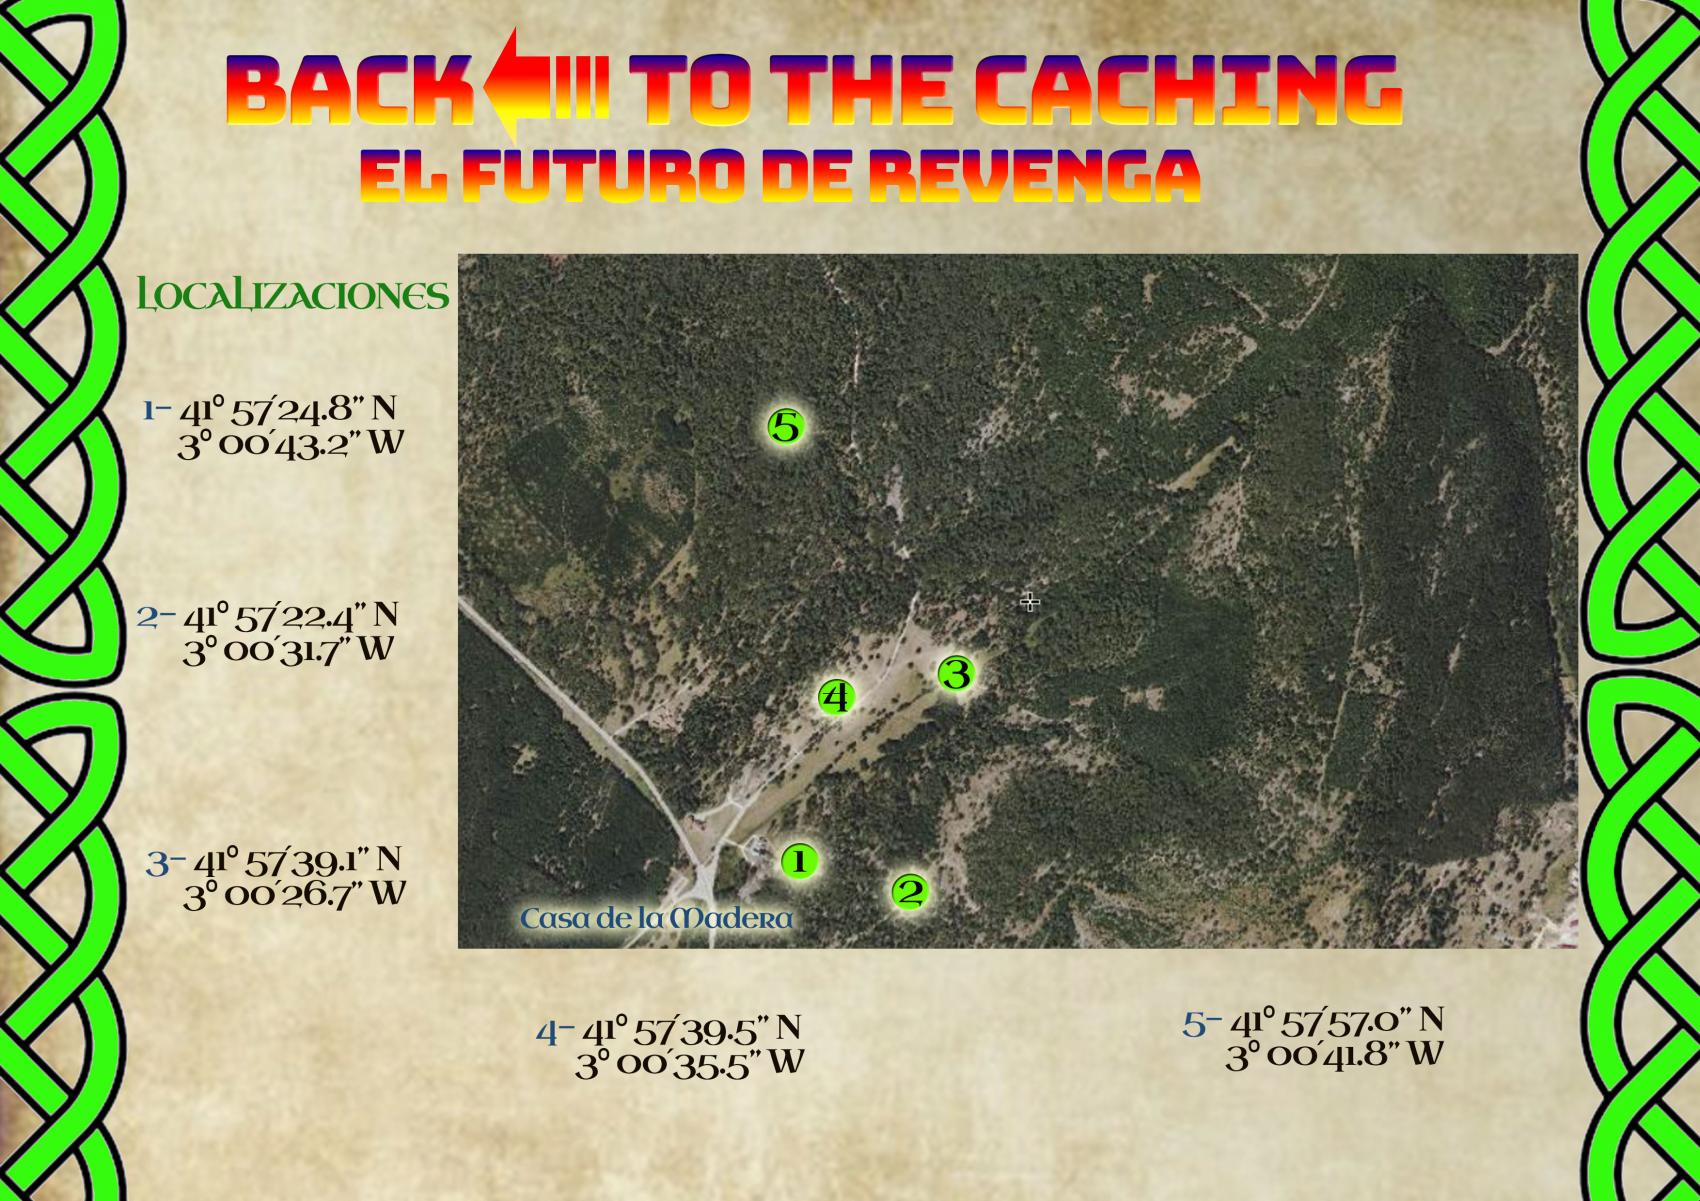 PELENDOCACHING III: BACK TO THE CACHING